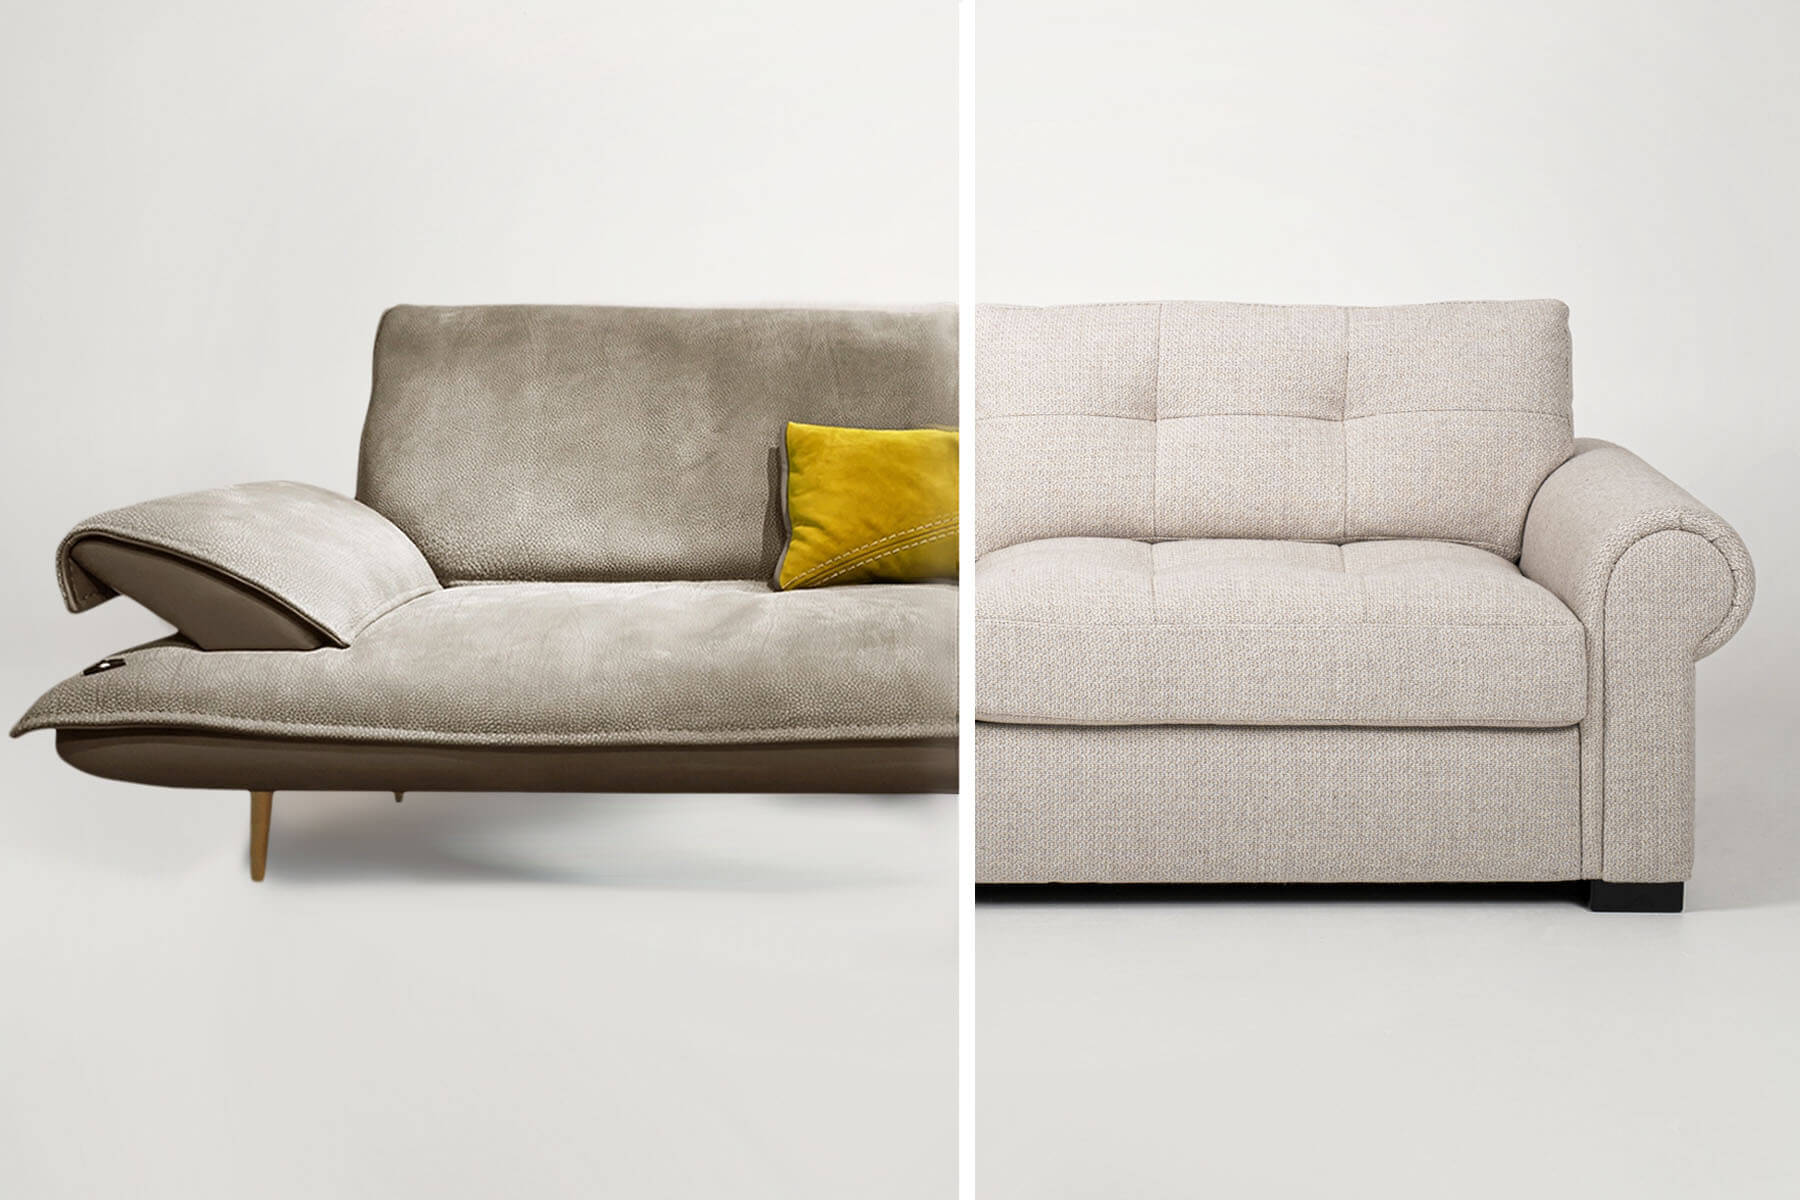 difference between sofa seat and bed